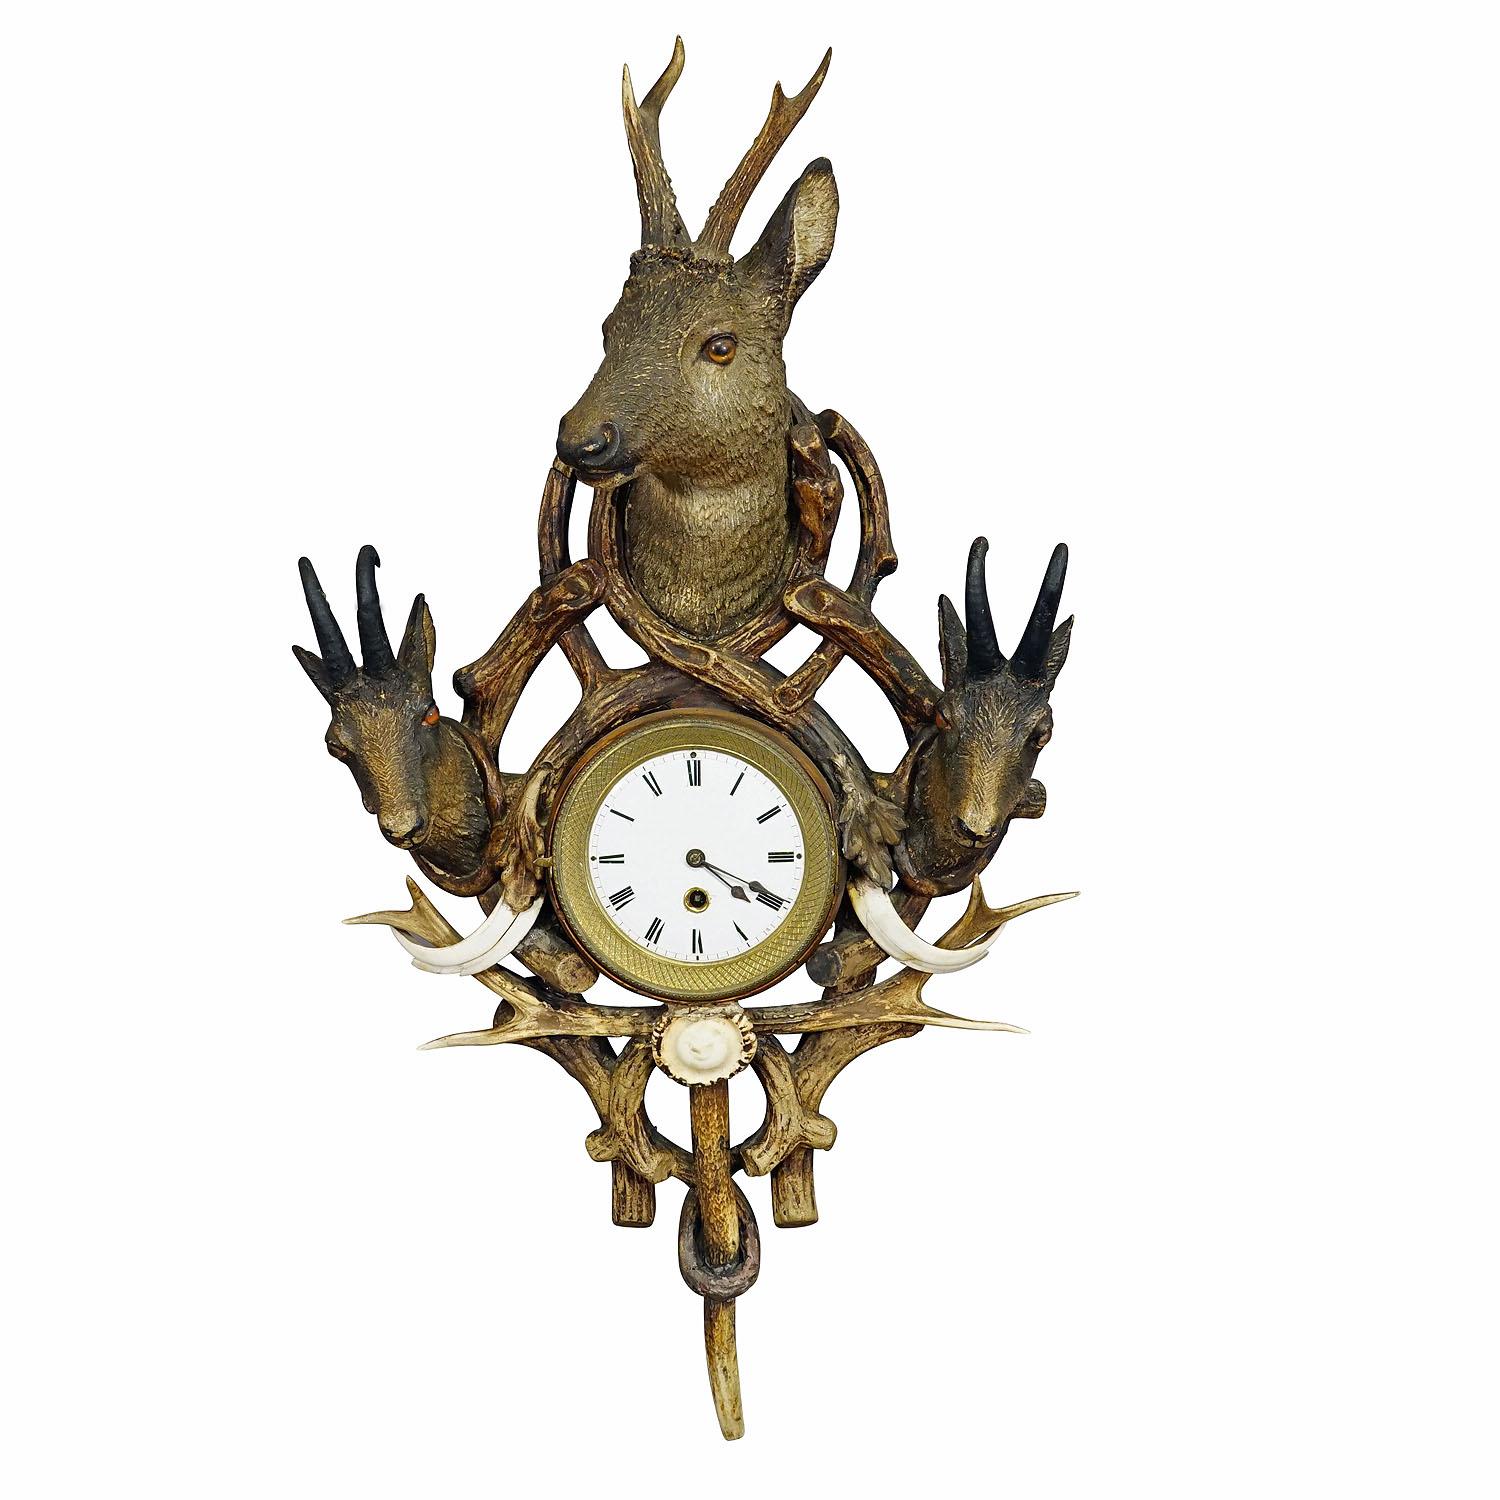 Antique Cabin Antler Wall Clock with Deer and Chamois Austria ca. 1900

A great rustic antler wall clock. The wooden case is richly decorated with plaster applications, a plaster deer head, two plaster chamois heads, antlers from the deer and a